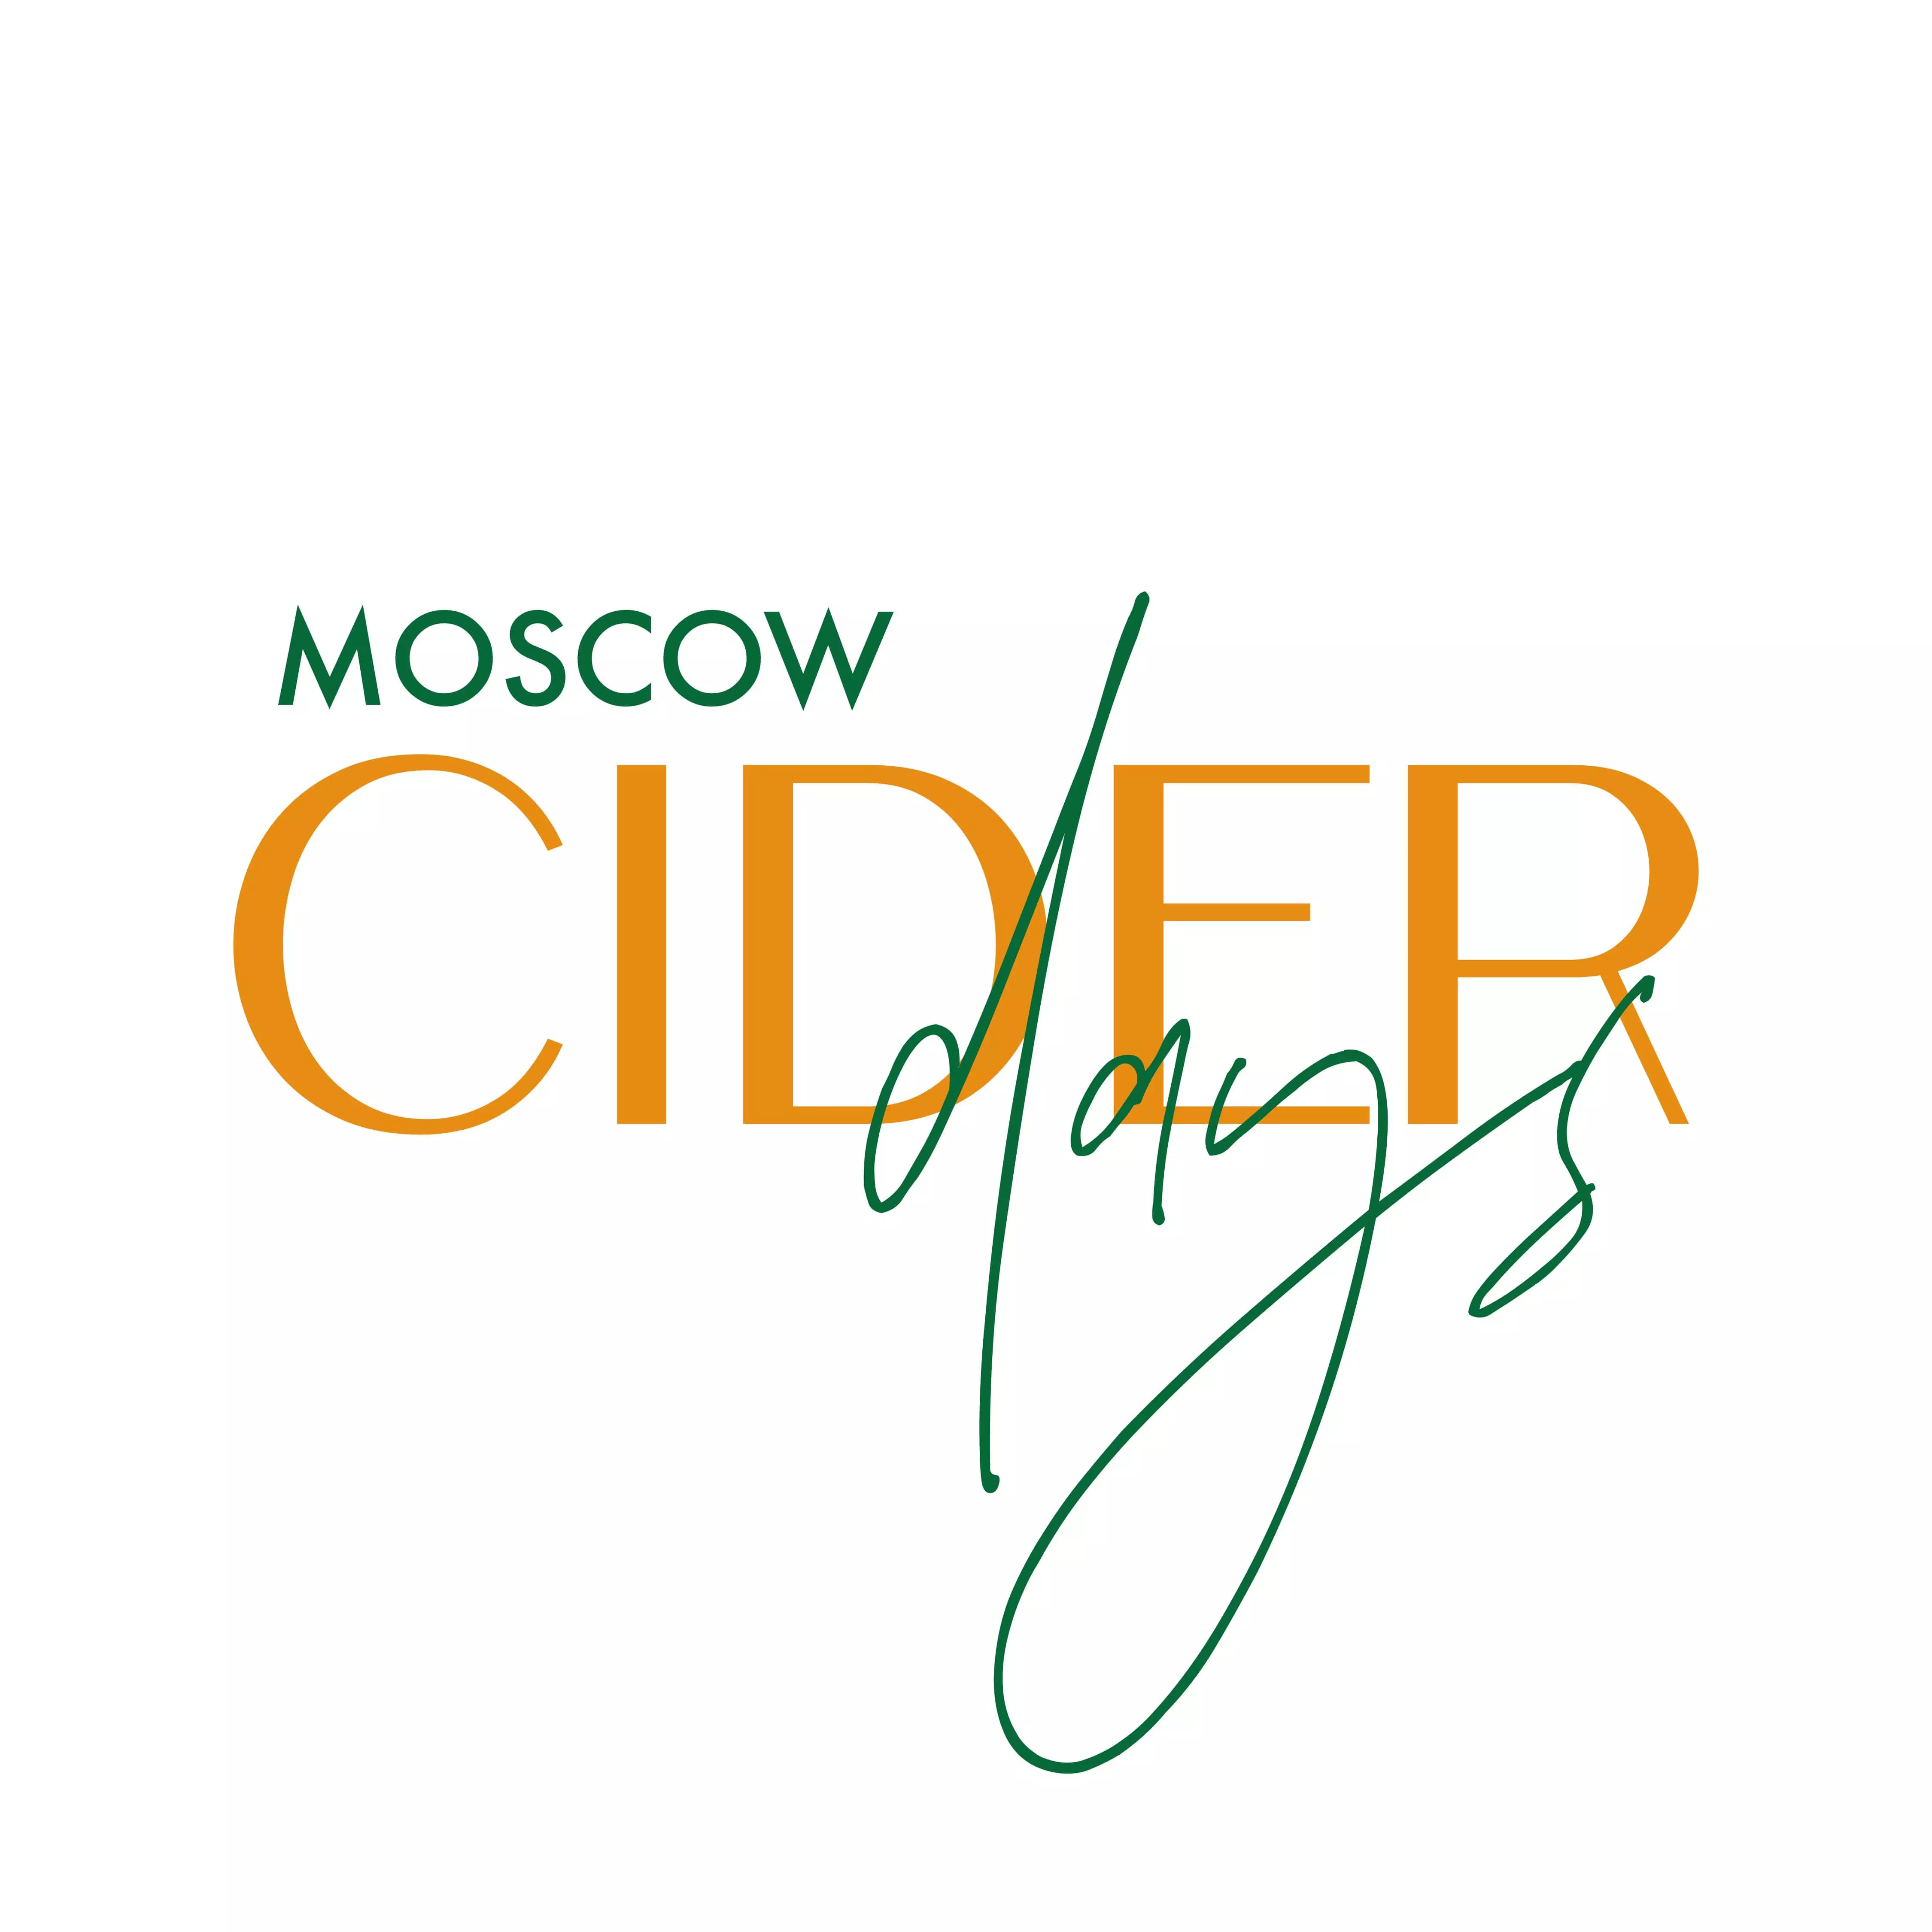 Moscow Cider Days